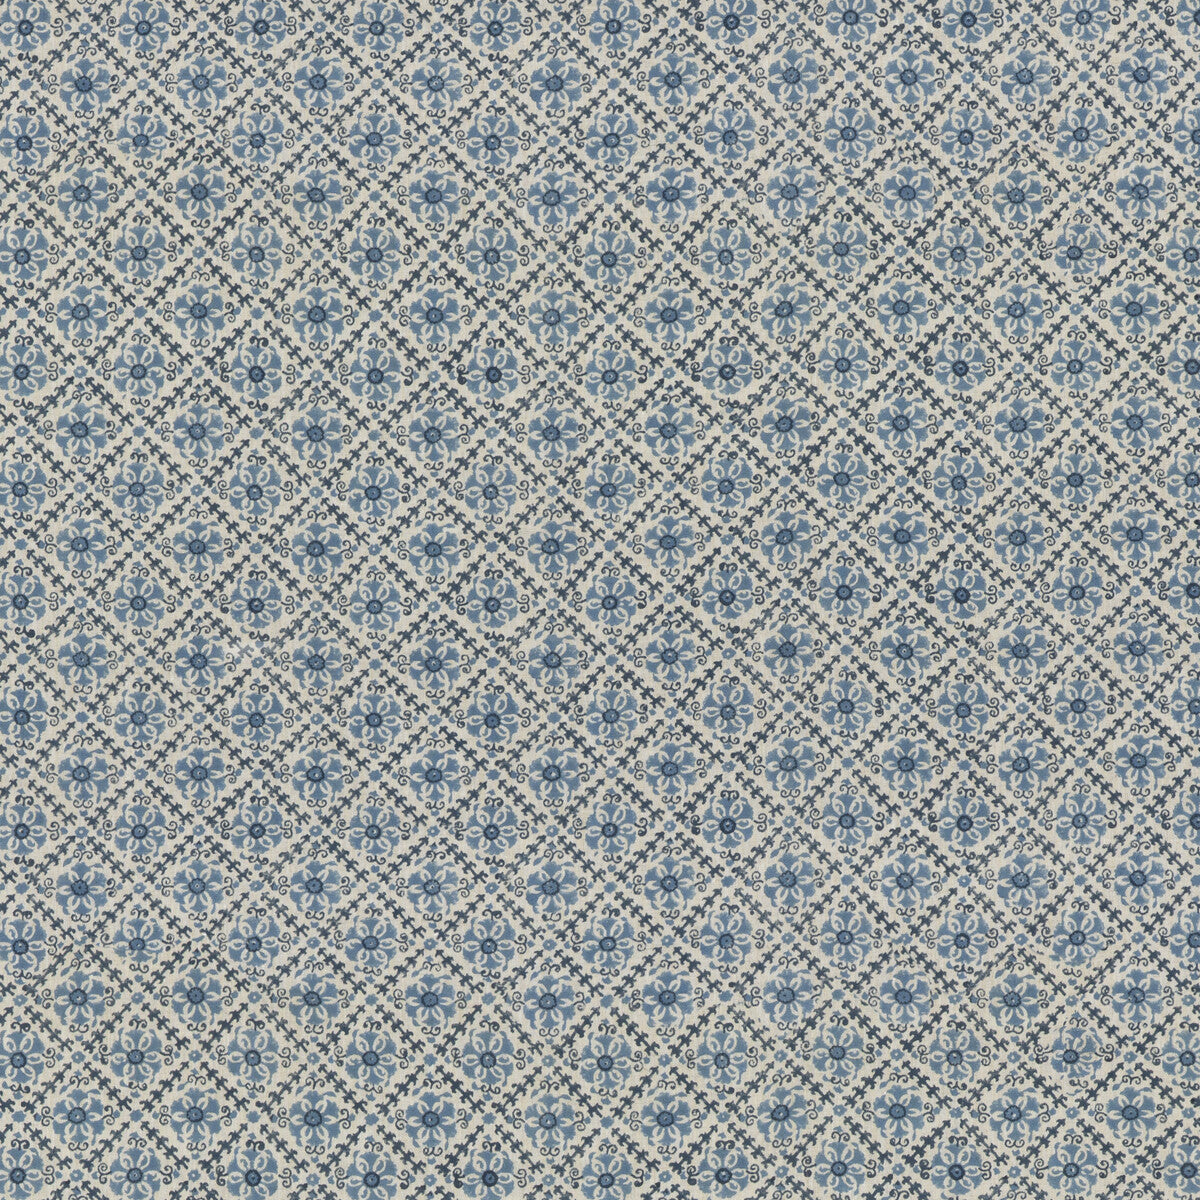 Camden Trellis fabric in blue color - pattern BP10909.1.0 - by G P &amp; J Baker in the Portobello collection